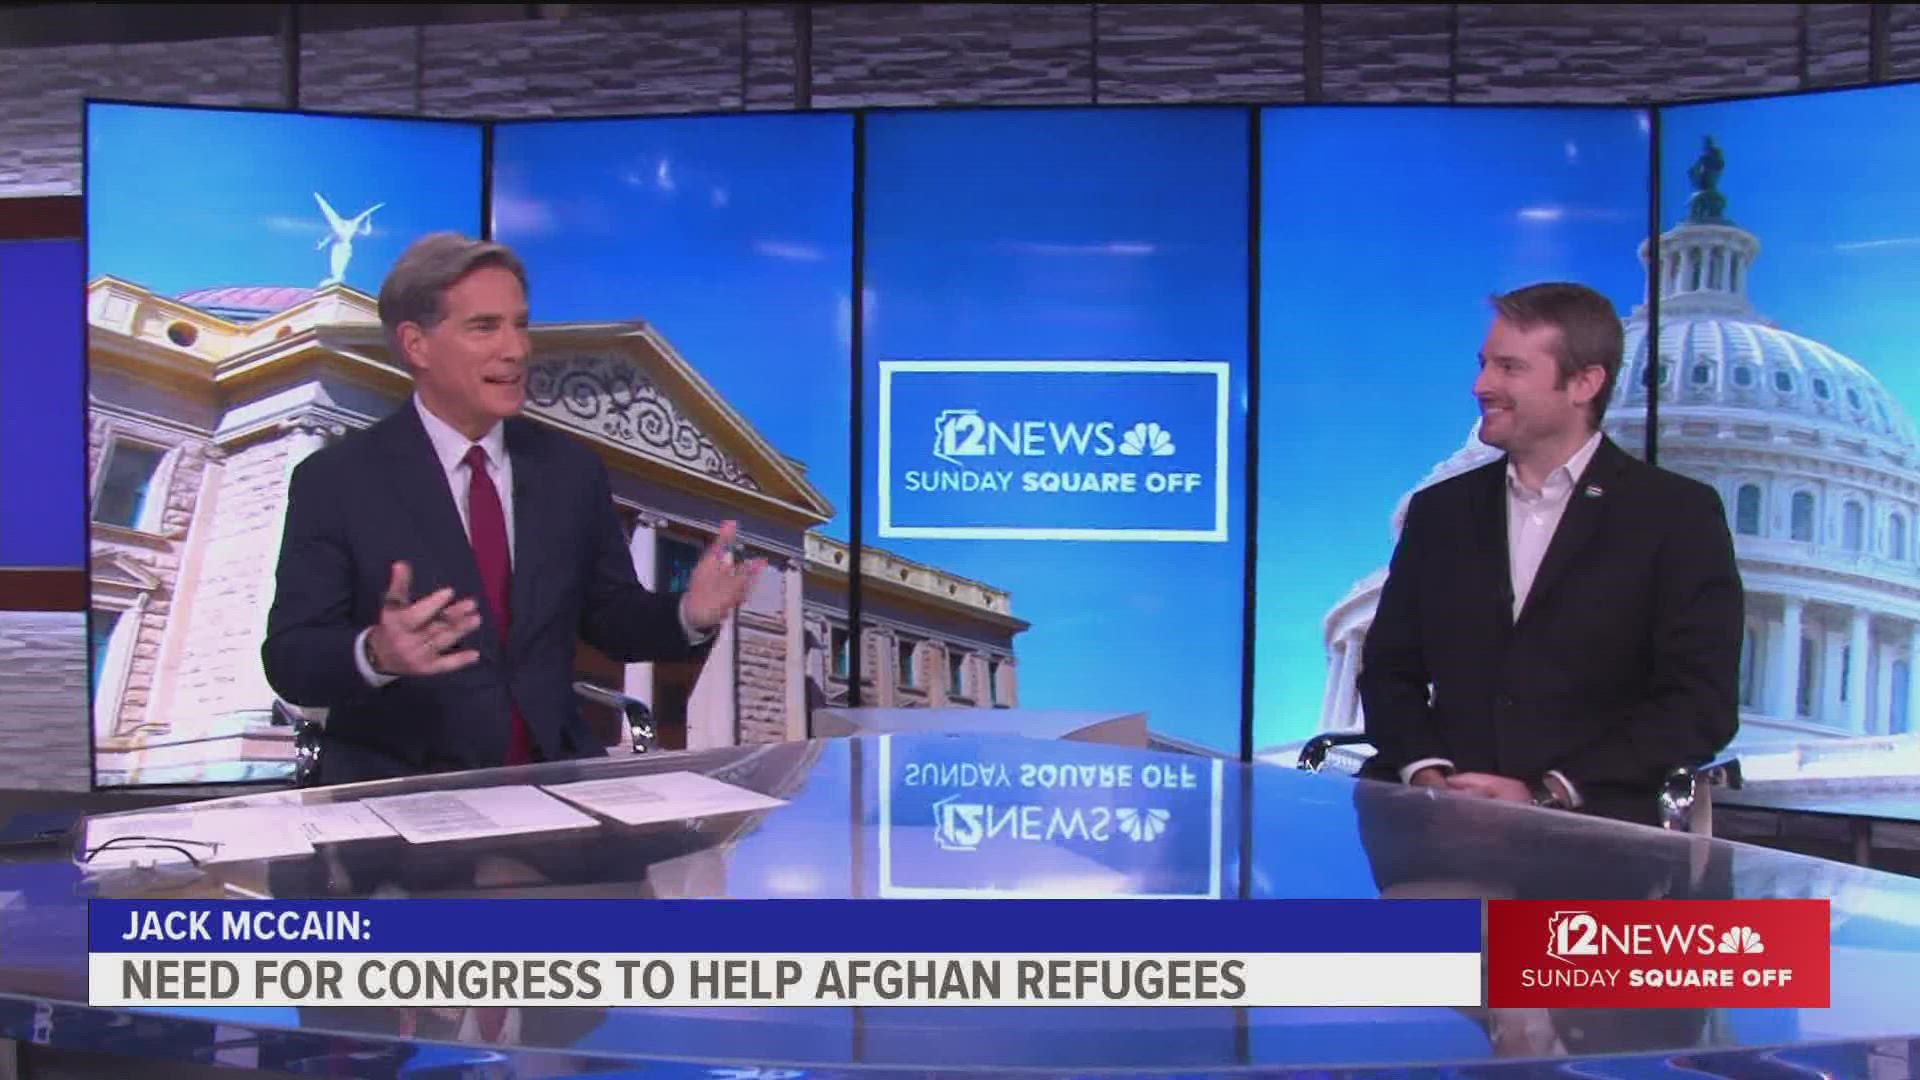 Jack McCain, an Afghanistan War veteran and son of the late Sen. John McCain, shares why he's taken up the cause of protecting Afghan refugees.